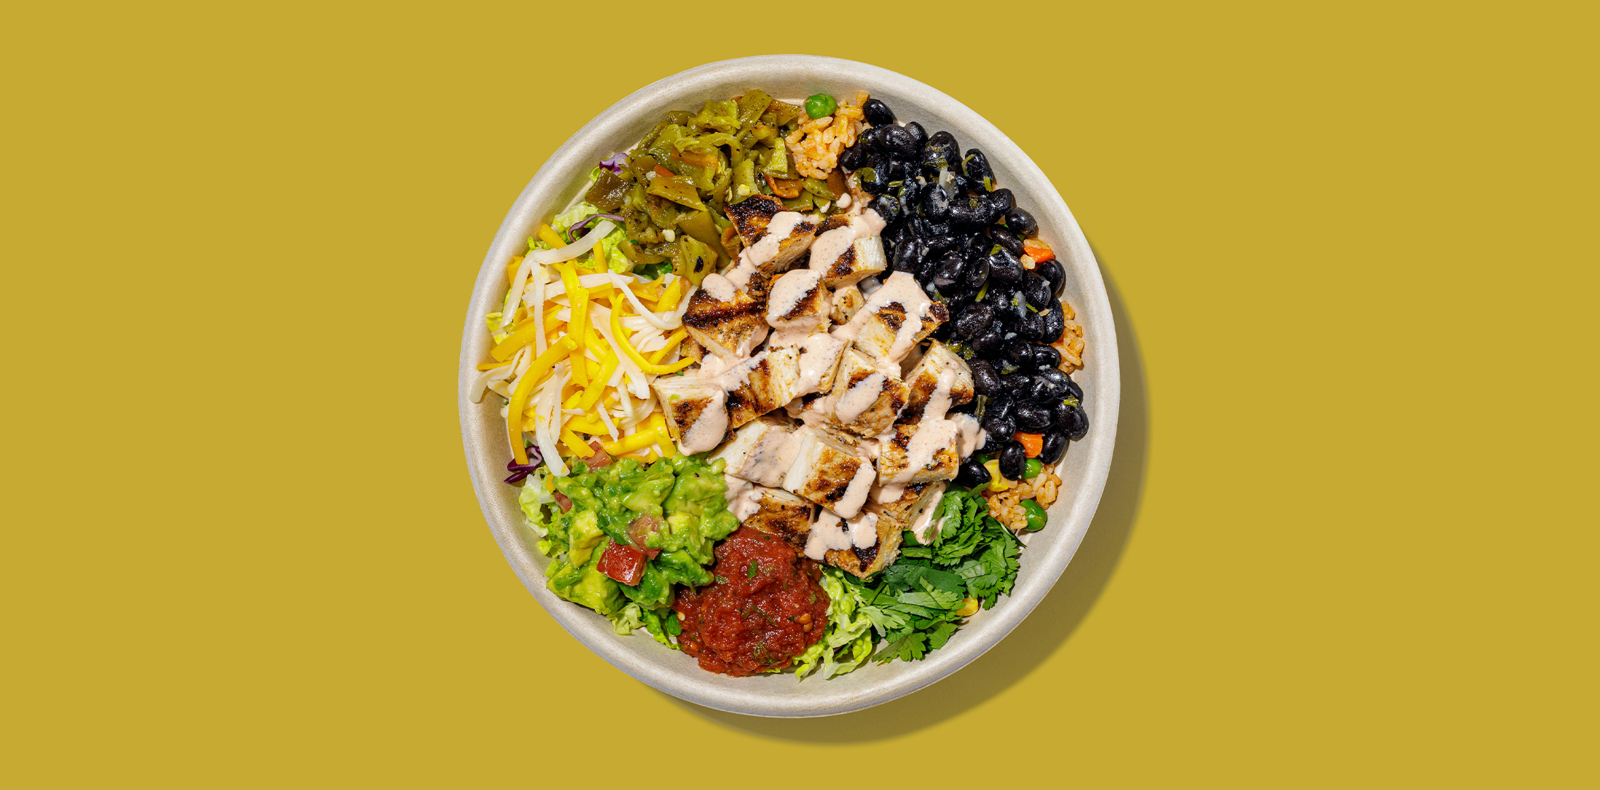 New Roadtrip Bowl called Blackened Chicken Bowl served with bed of rice, chicken breast, cabbage, guacamole, black beans, hatch chiles, jack + cheddar, salsa, corn, cilantro, tapatío crema alt tag